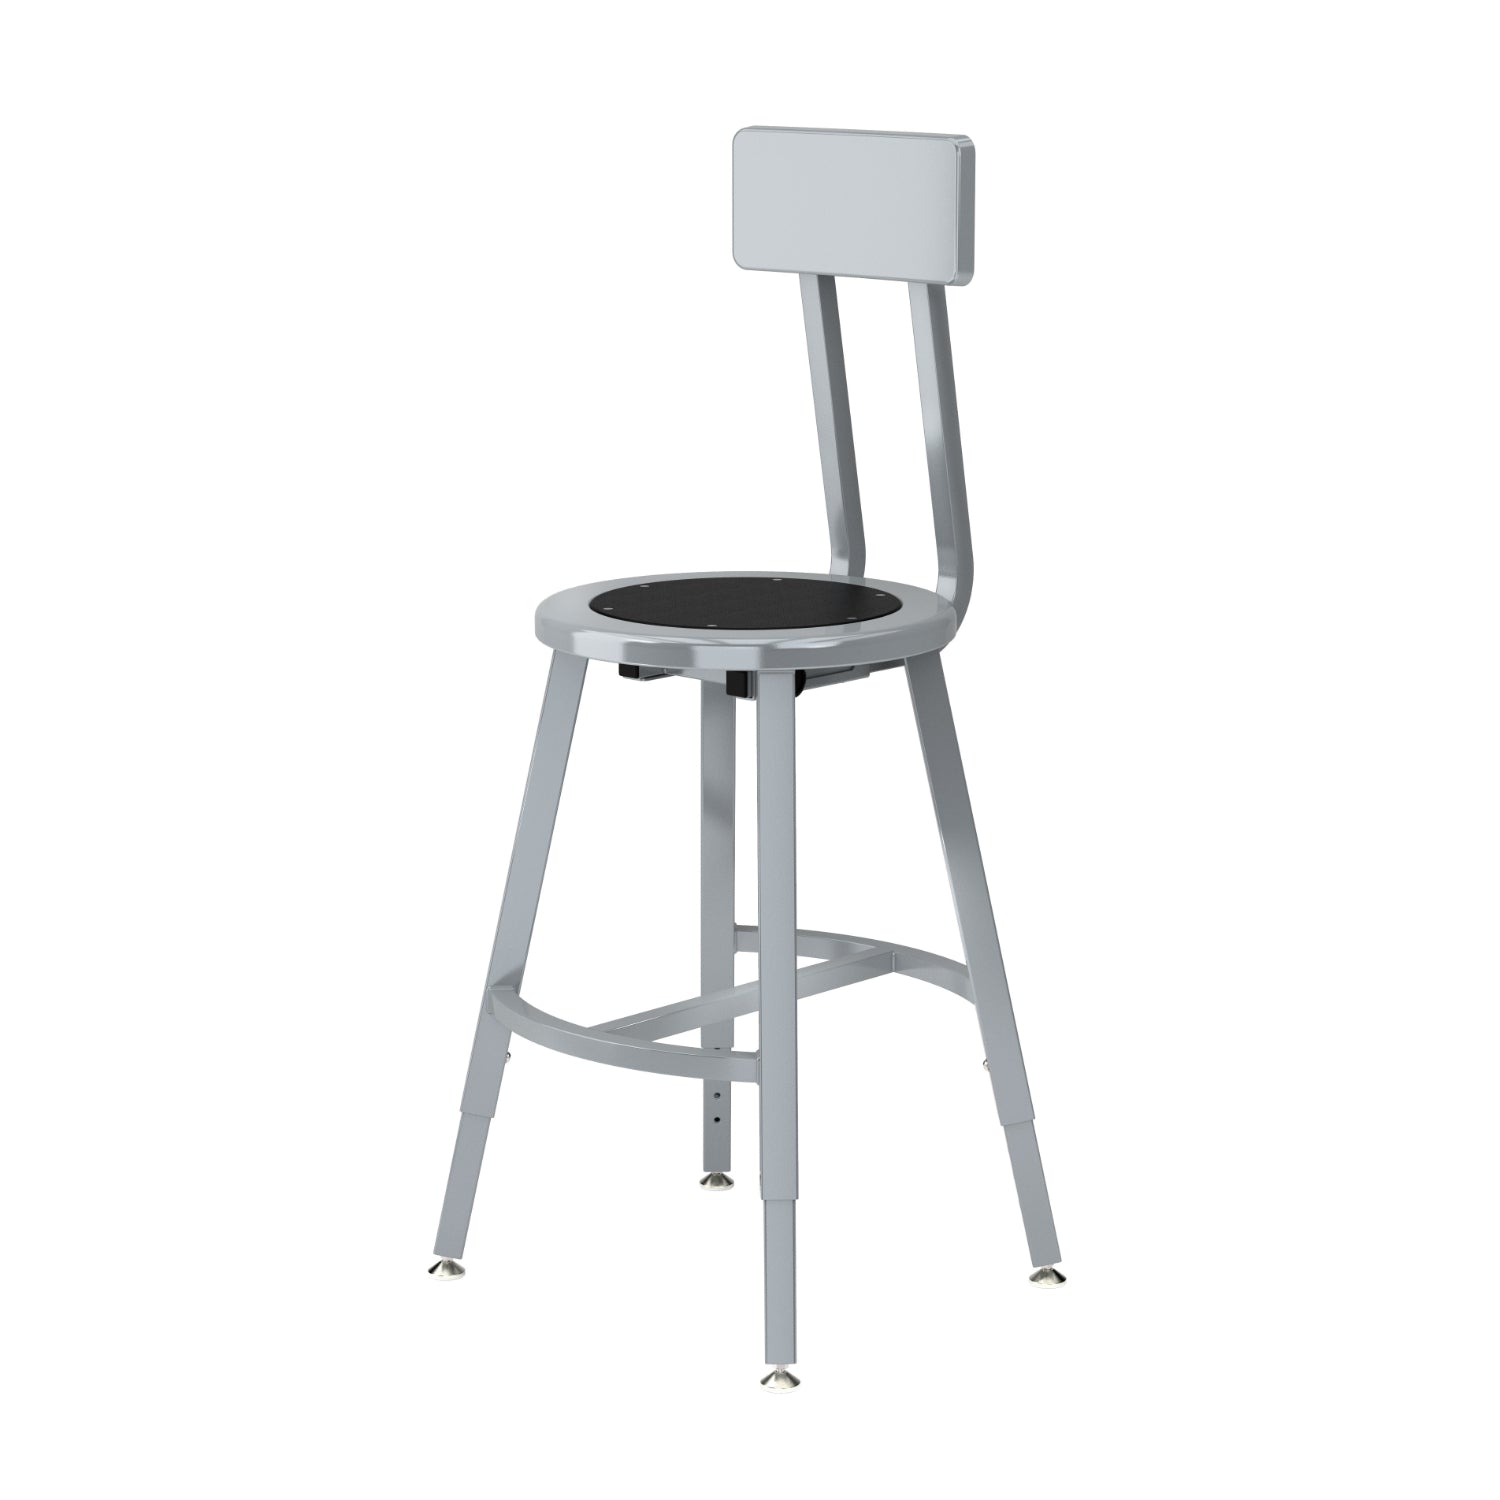 Titan Adjustable Height Stool with Backrest, Steel Seat with Black Poly Center, 18-26" Seat Height